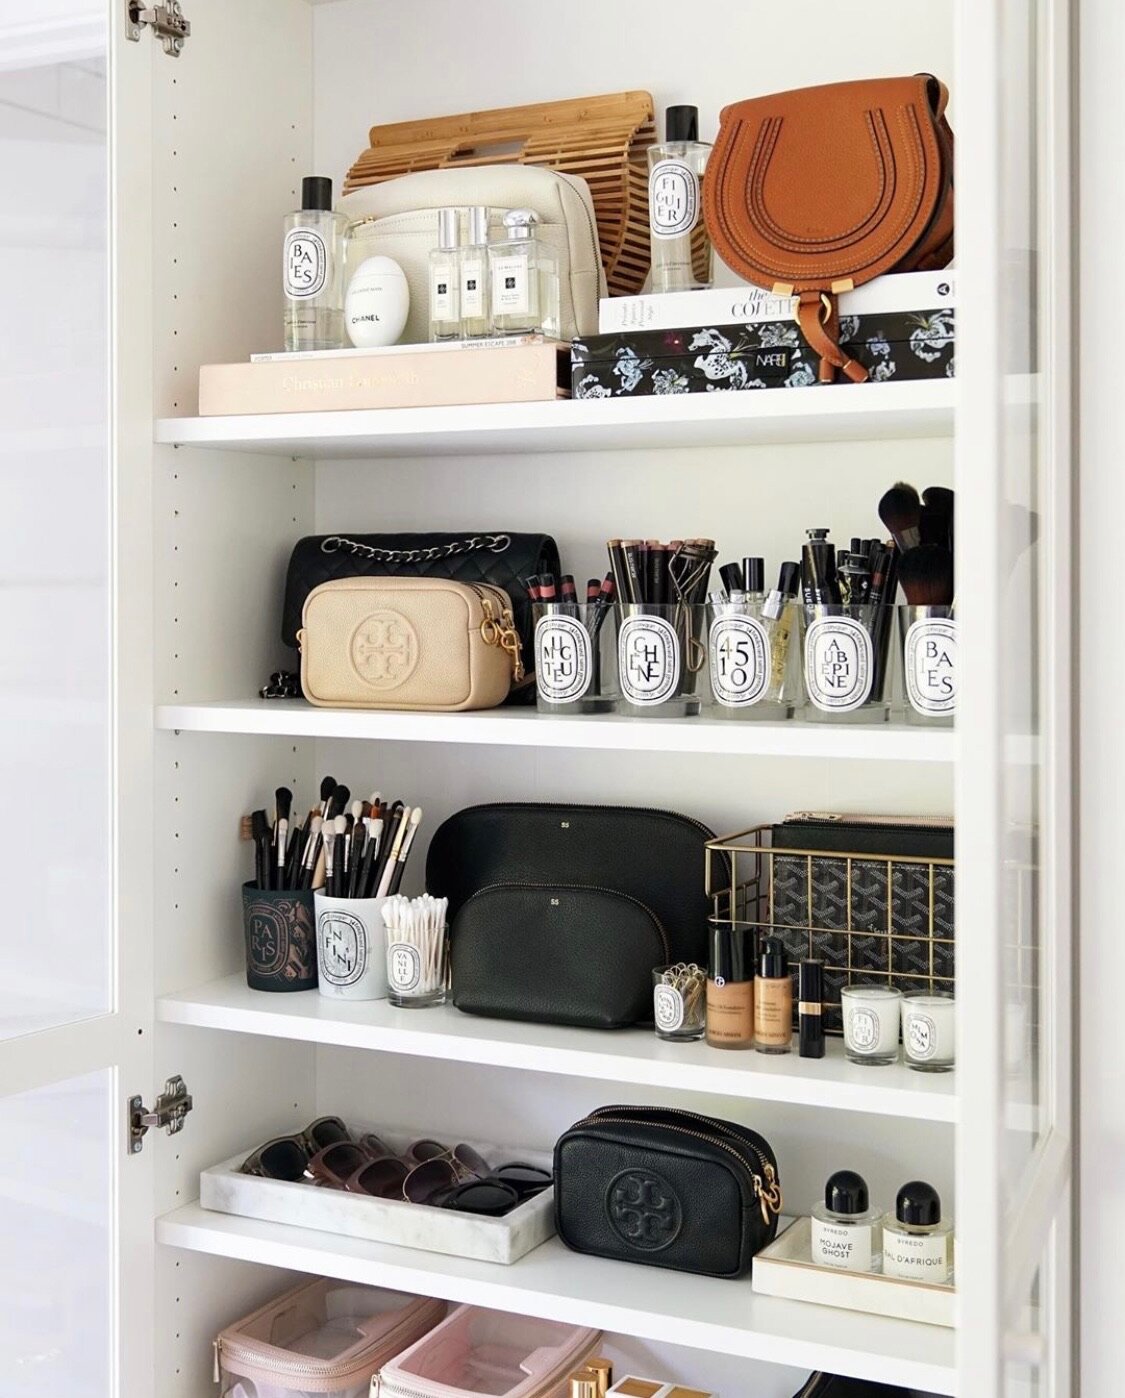 An organizing project should be simple. ✨

Swoon tip of the day:

Take 15 minutes out of your day to organize a small area, like your makeup drawer or cabinet, and you&rsquo;ll gradually build your way to an organized life!⁠

#organizingtips #organiz